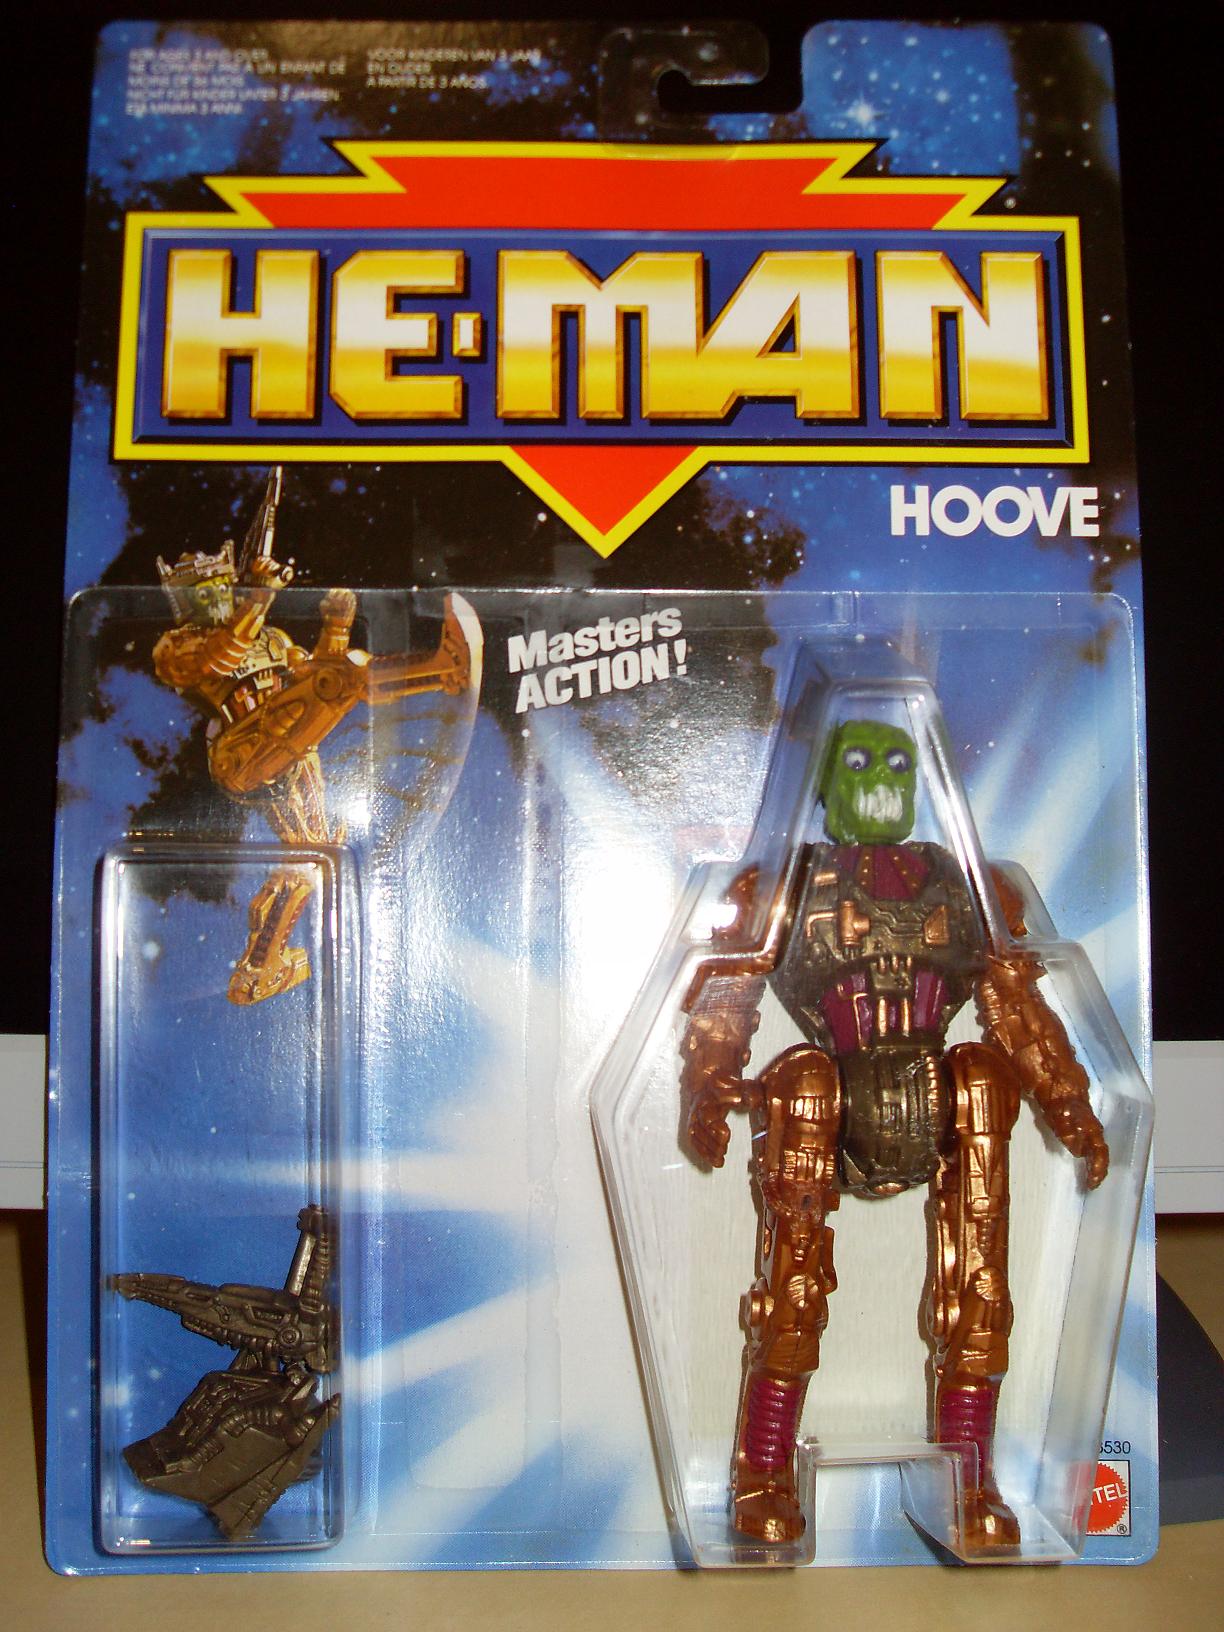 LORD HE-MAN Colecction 8425